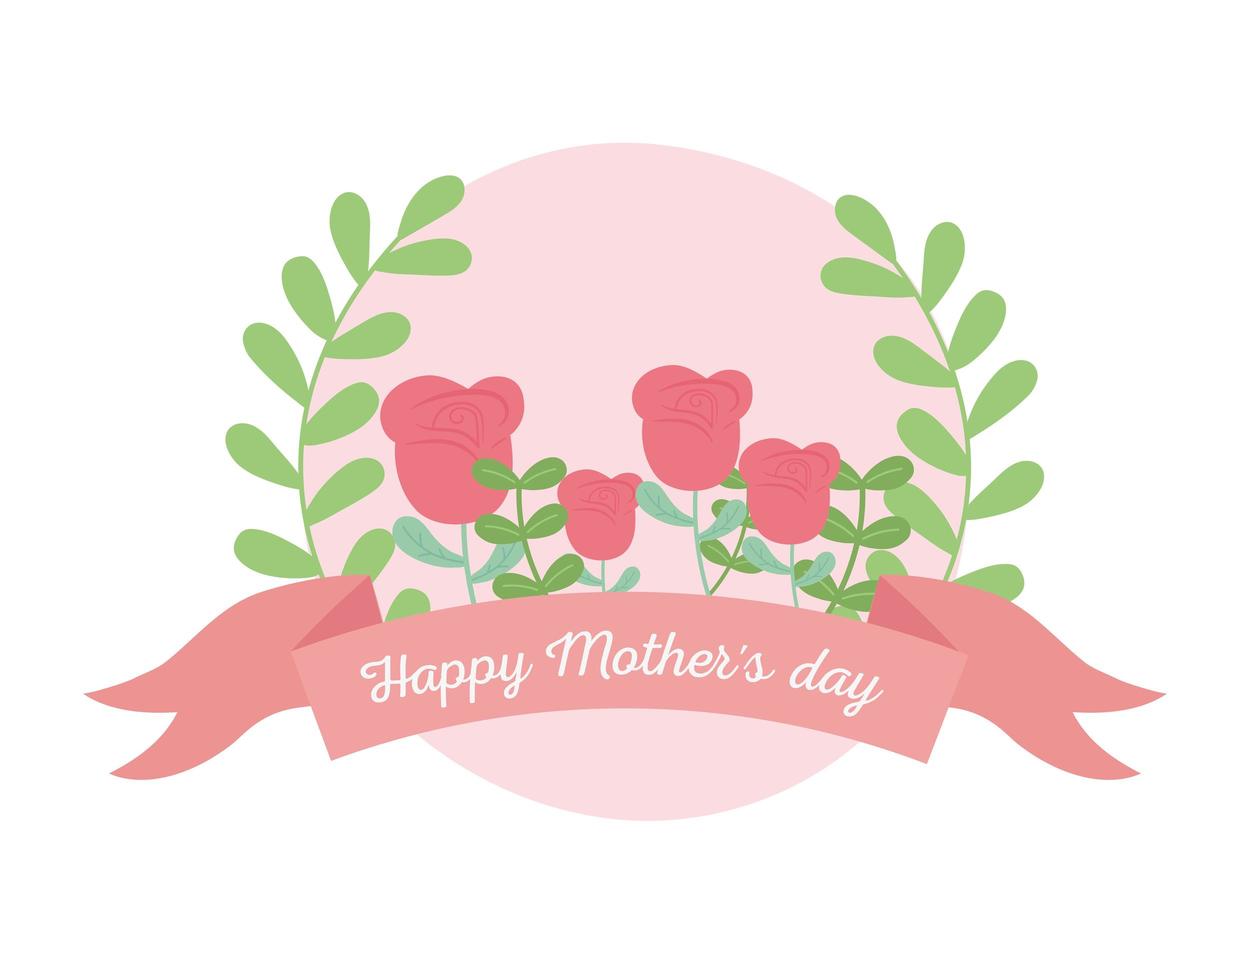 happy mothers day, flowers roses leaves floral ribbon label vector